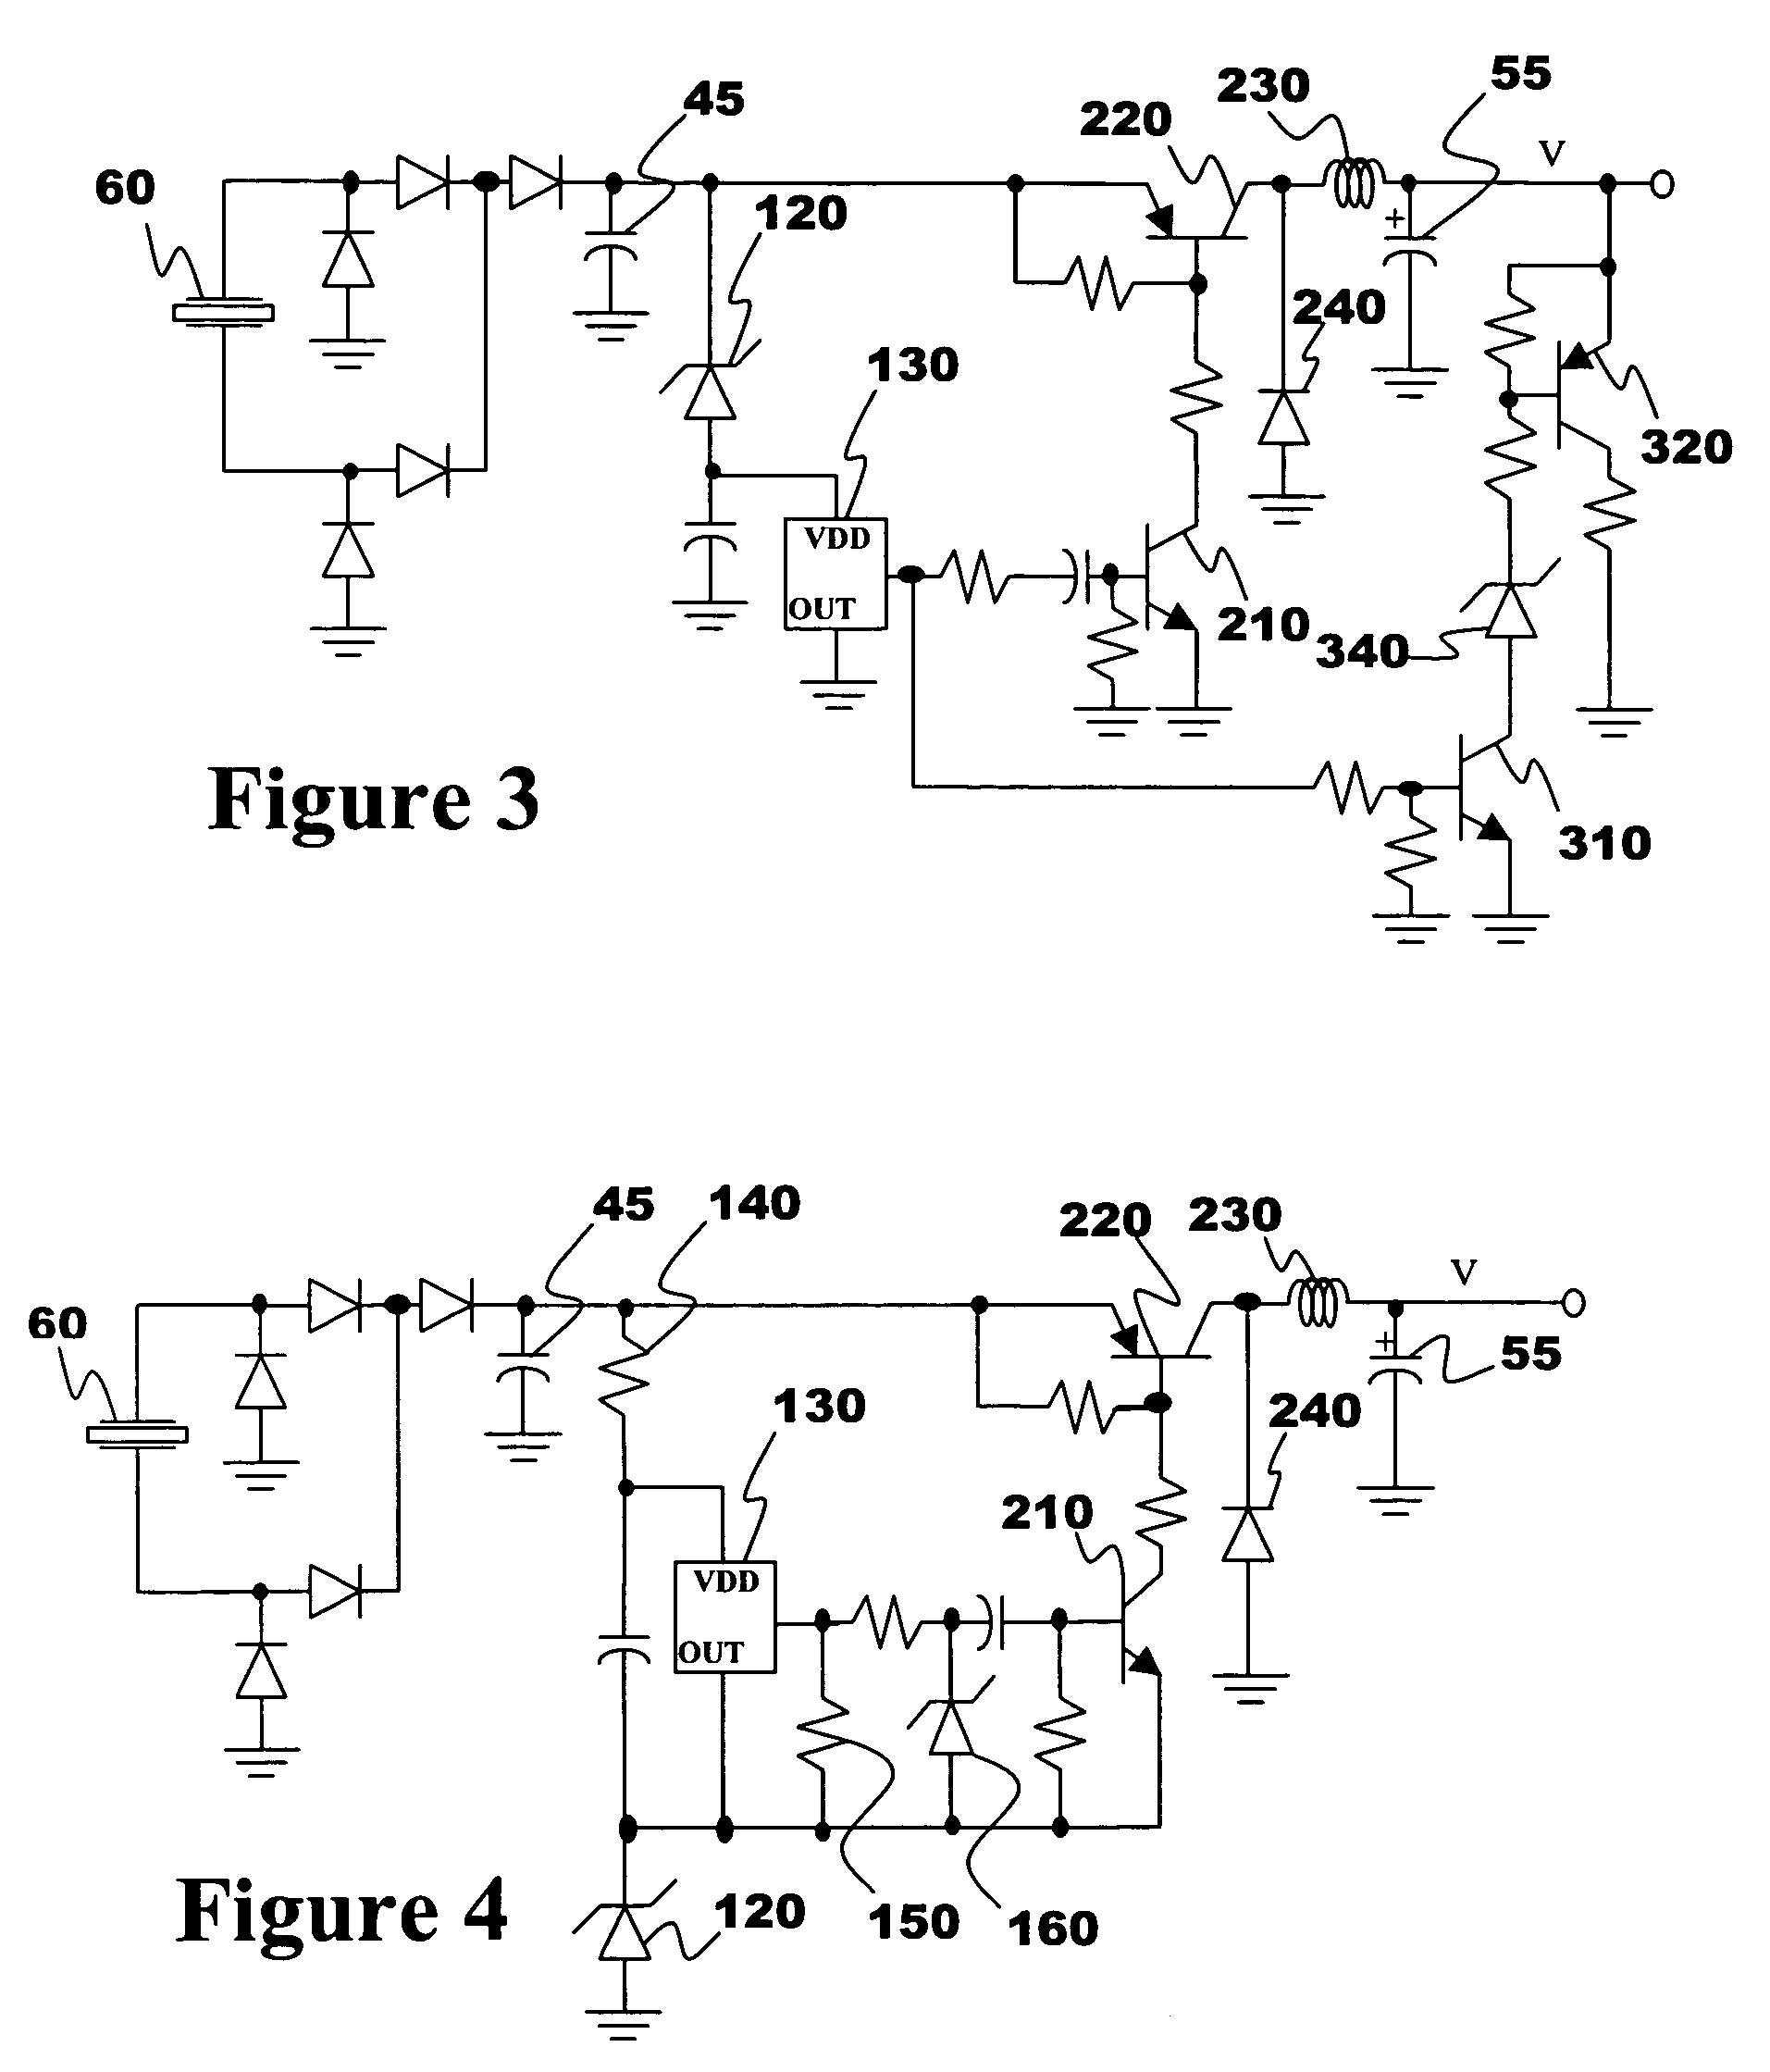 Power conversion from piezoelectric source with multi-stage storage